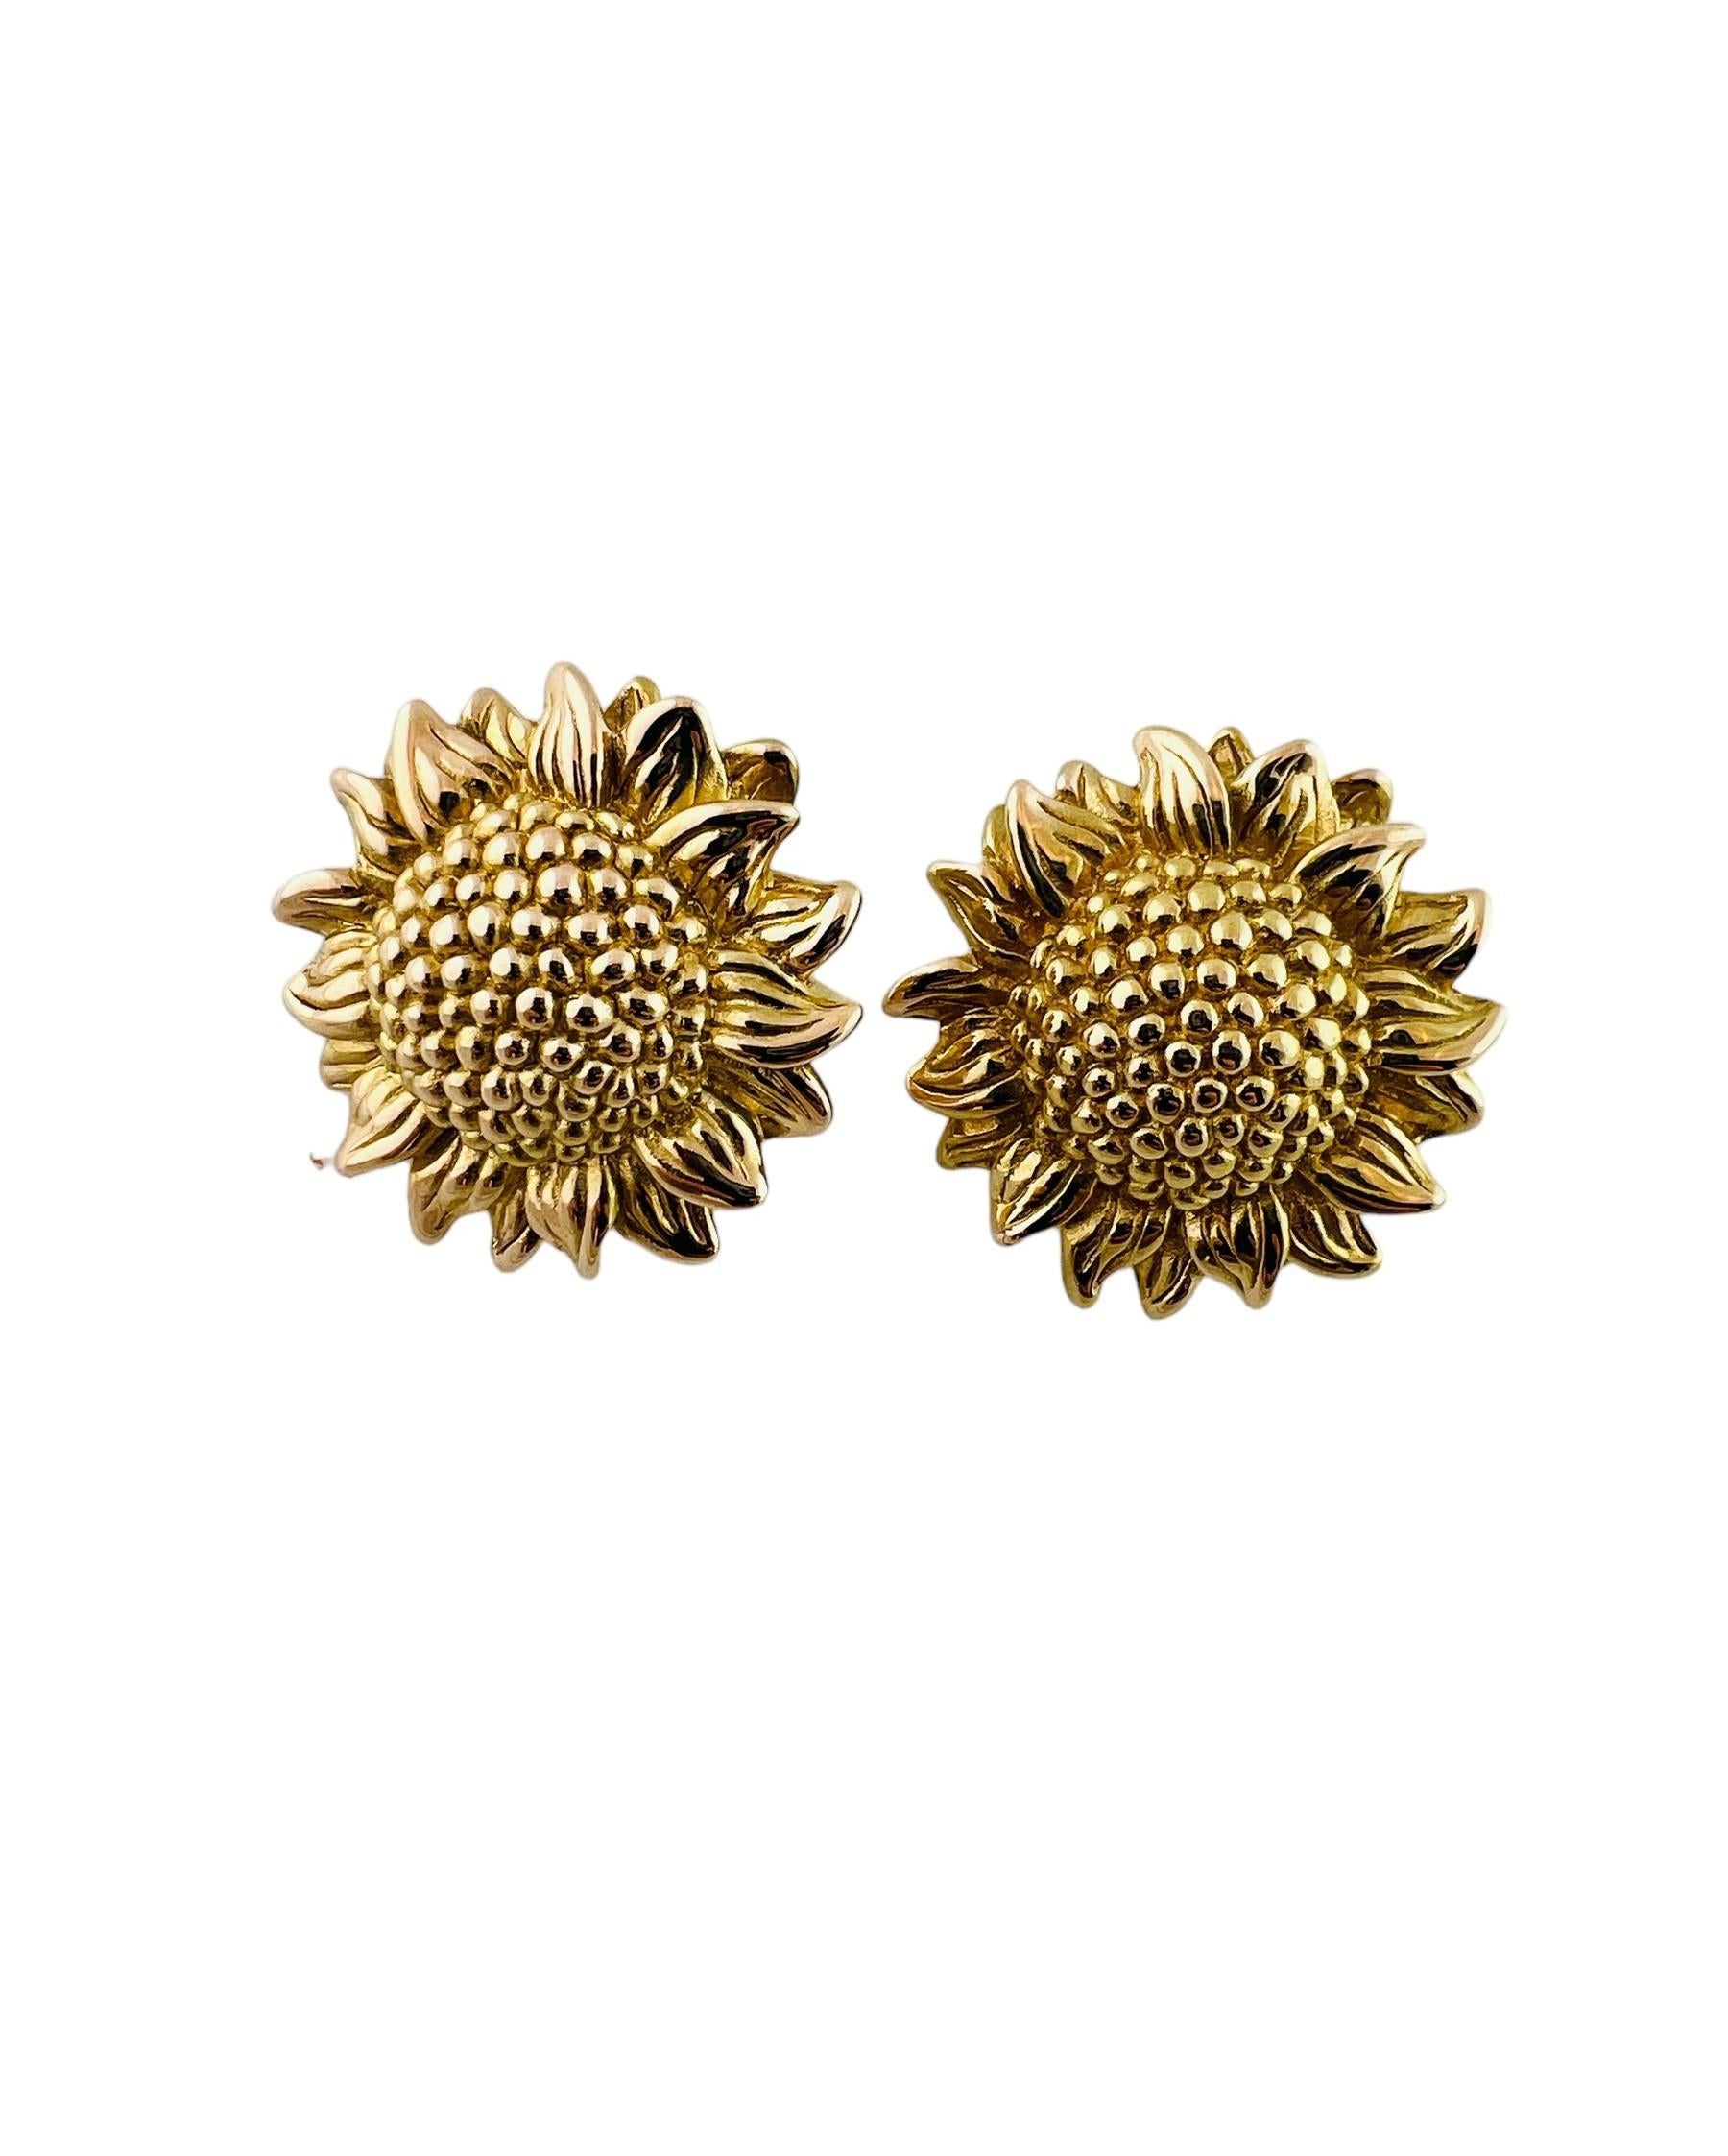 Vintage 14K Yellow Gold Sunflower Earrings w/ Sterling Silver Backs

This gorgeous set of 14K gold sunflower earrings are paired with adorable sterling silver heart earring backs!

Earring size: 29.9mm
Back size: 14.04mm X 9.98mm

Weight: 5.8 g/ 3.7